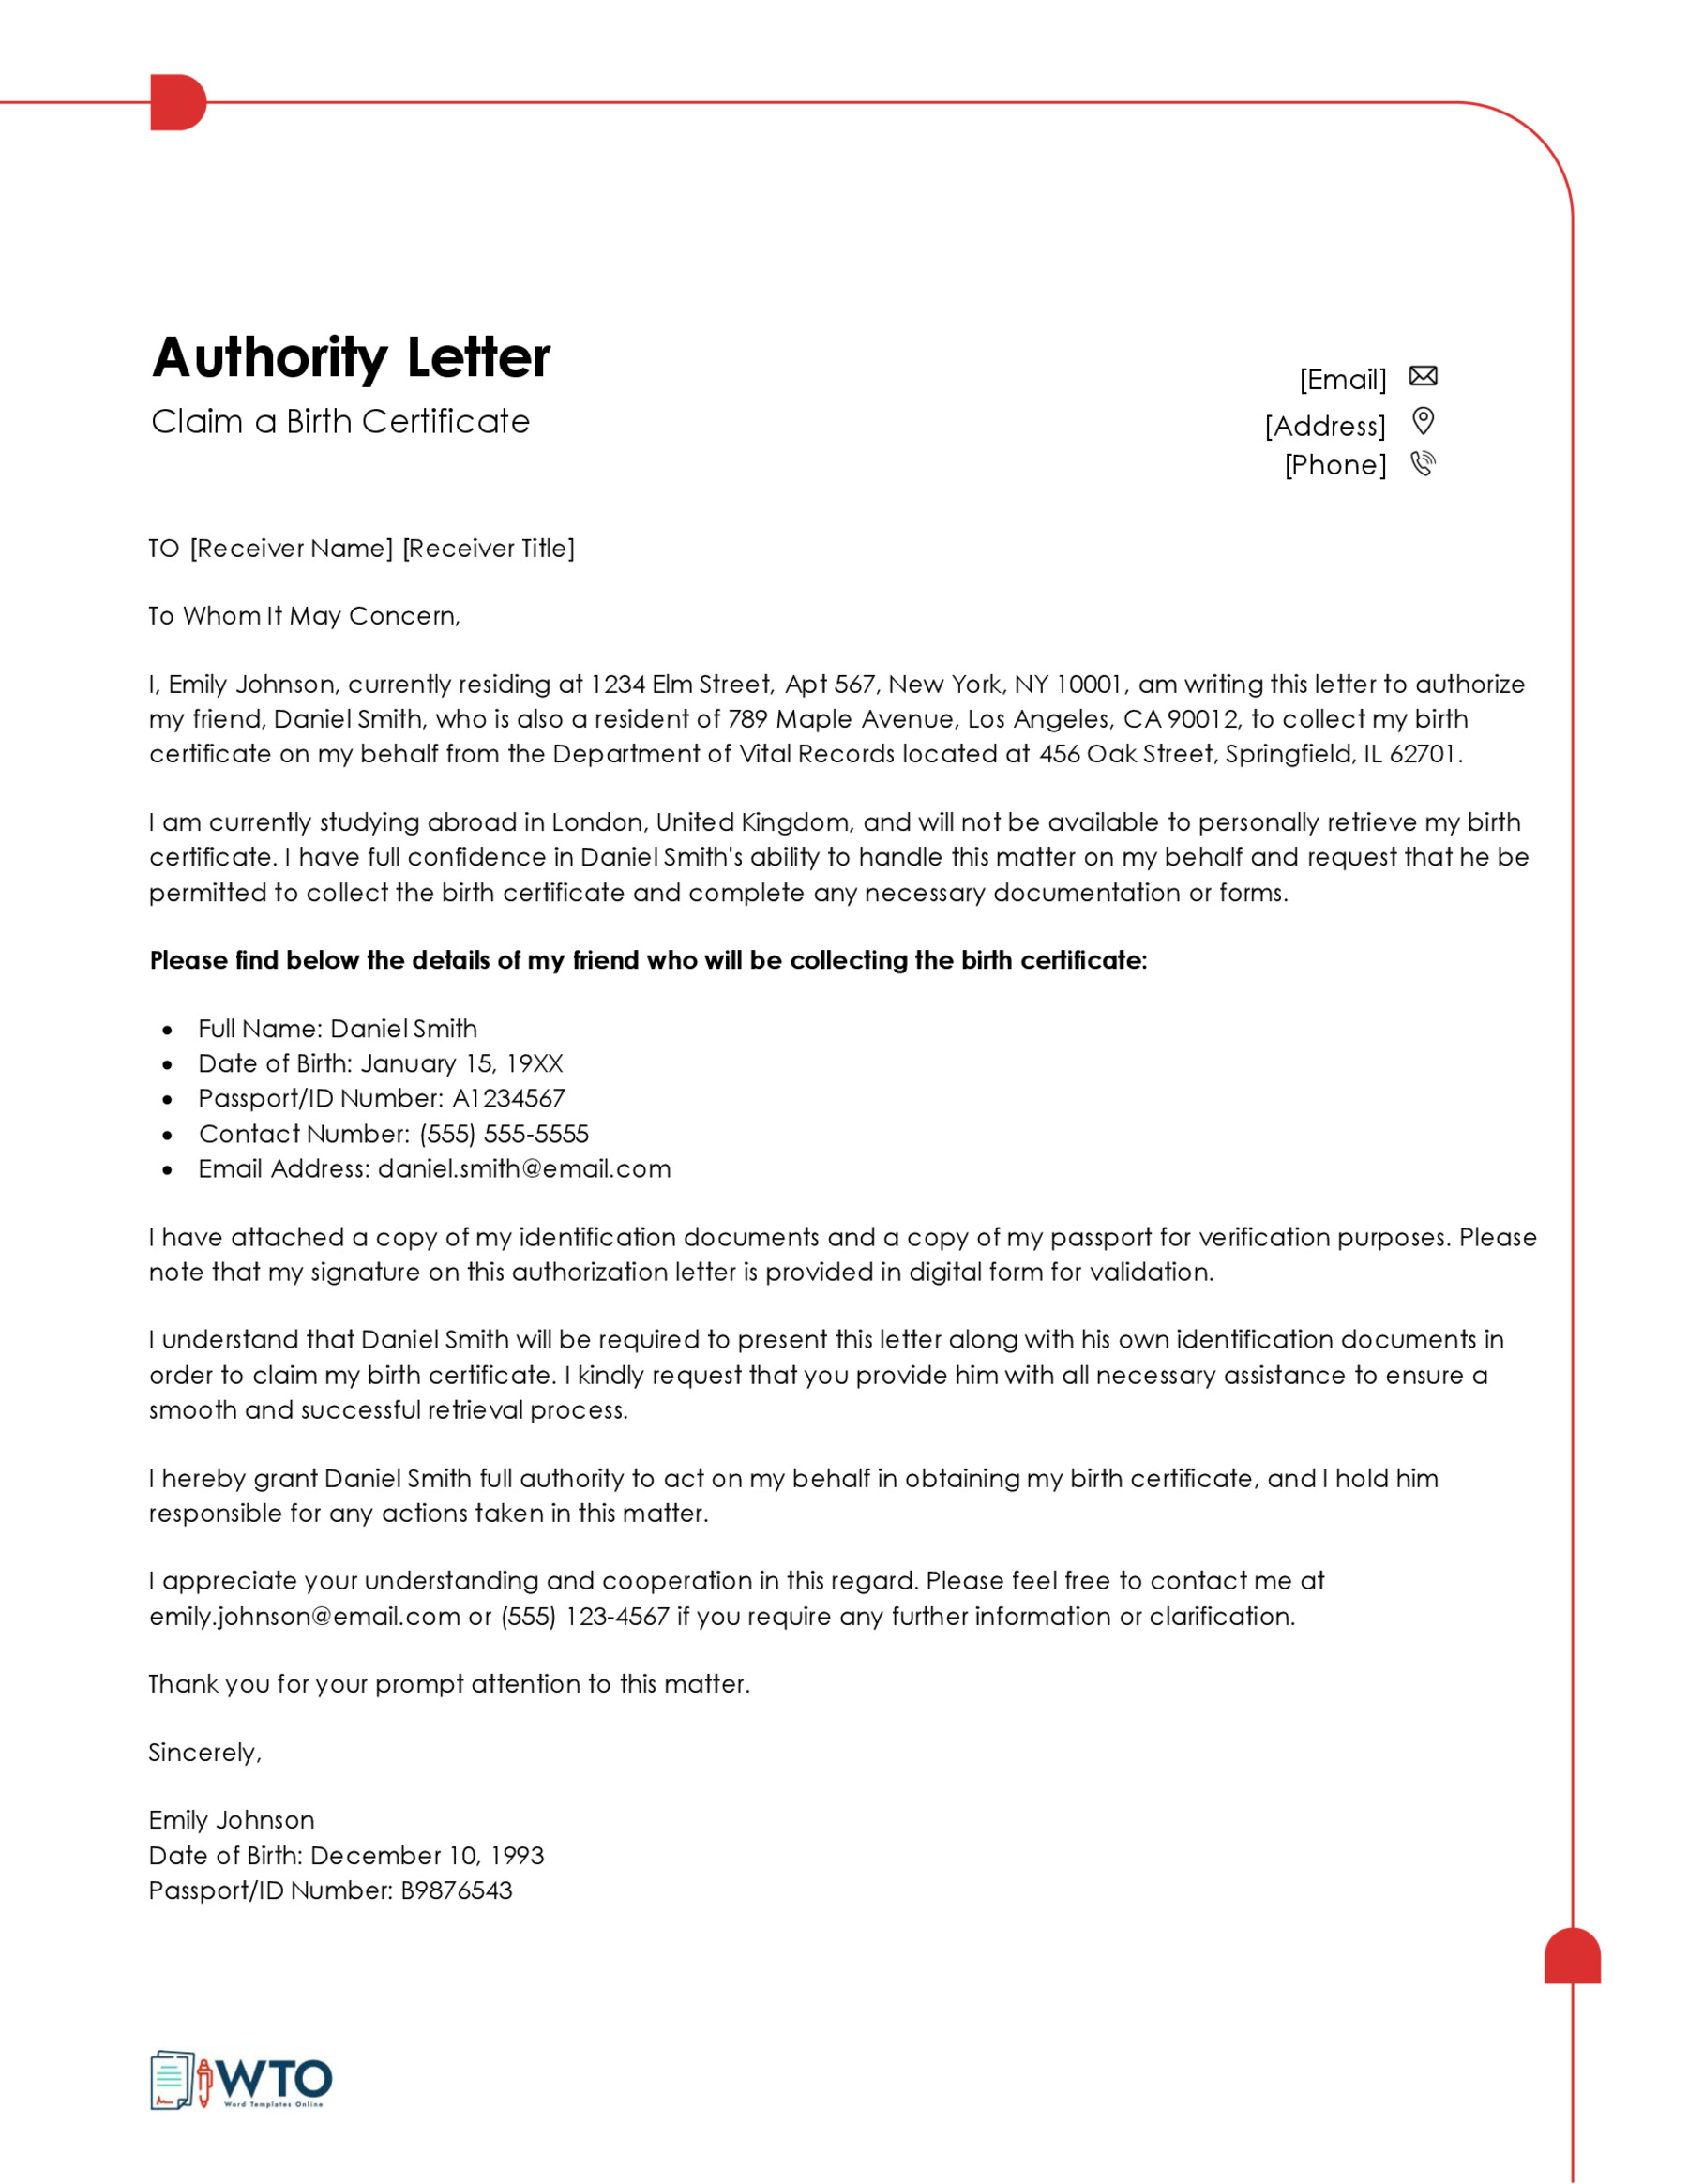 Sample Authorization Letter for Claiming Birth Certificate-Free Download